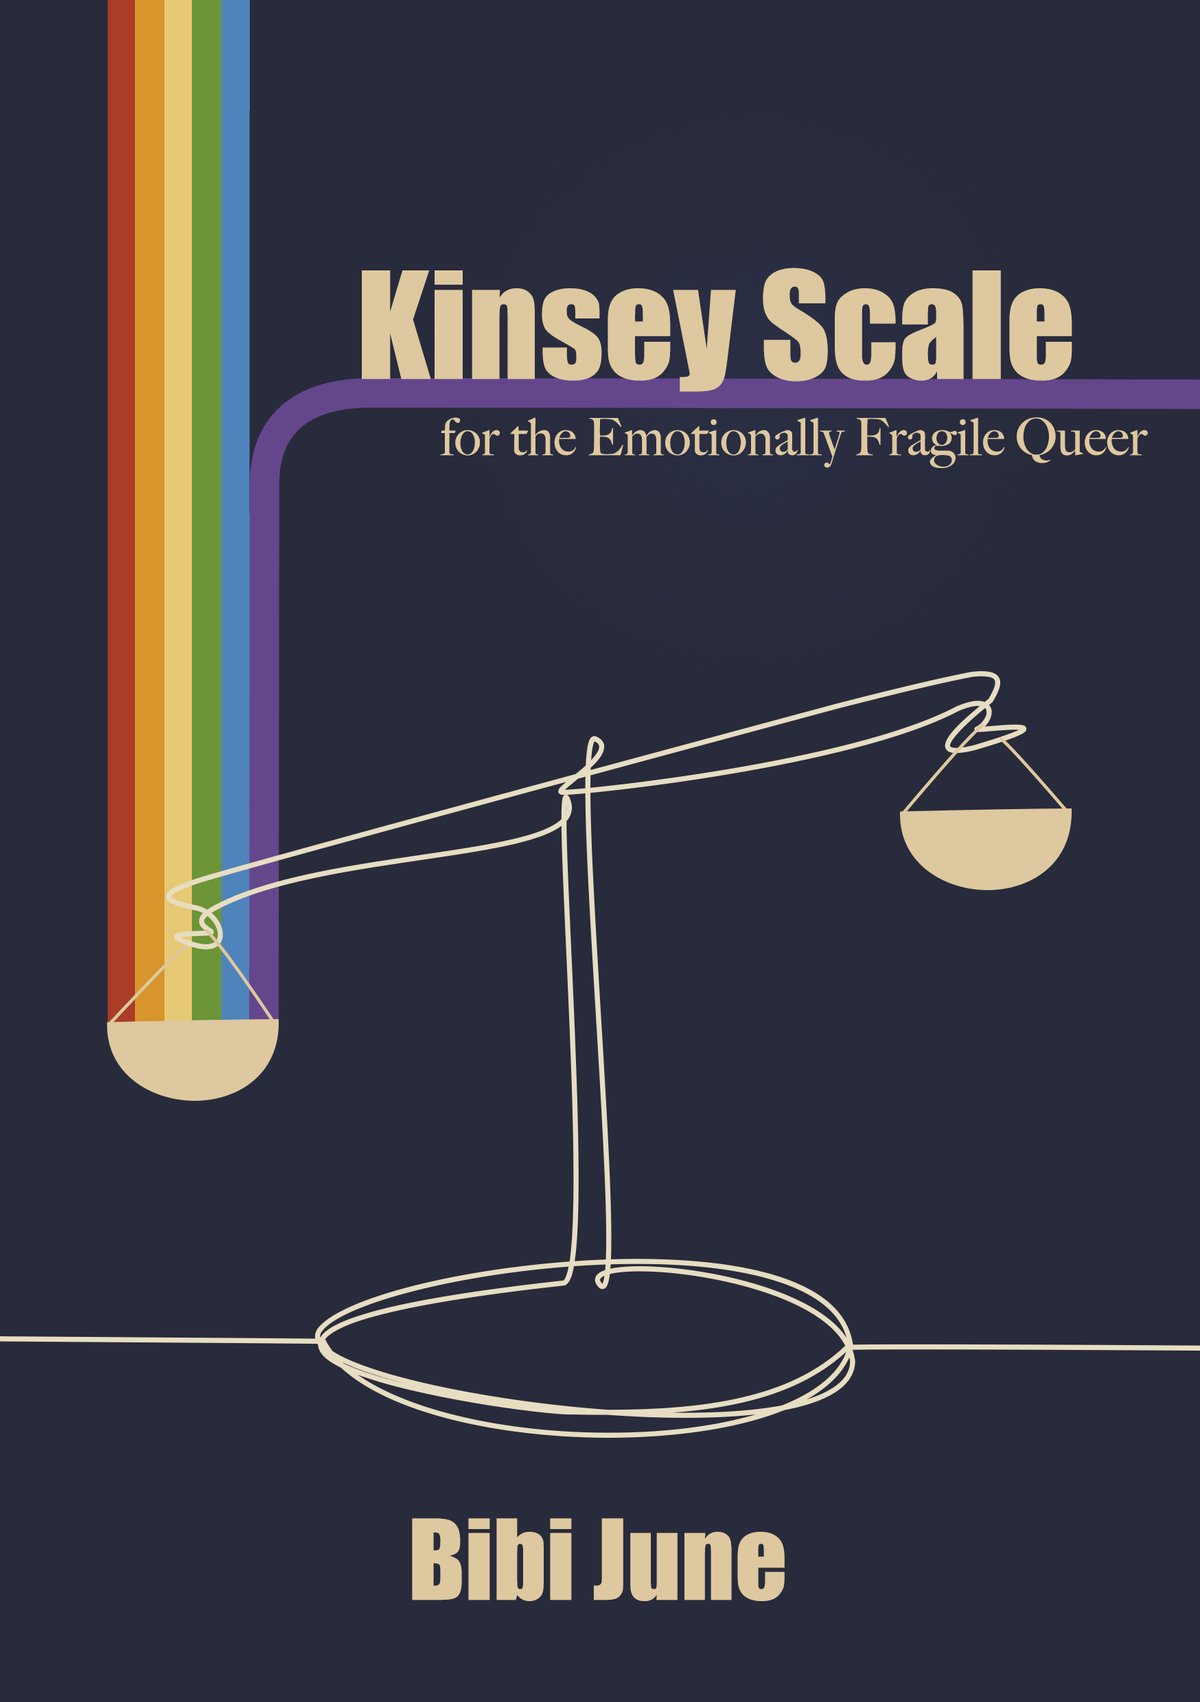 Image of Kinsey Scale for the Emotionally Fragile Queer by Bibi June